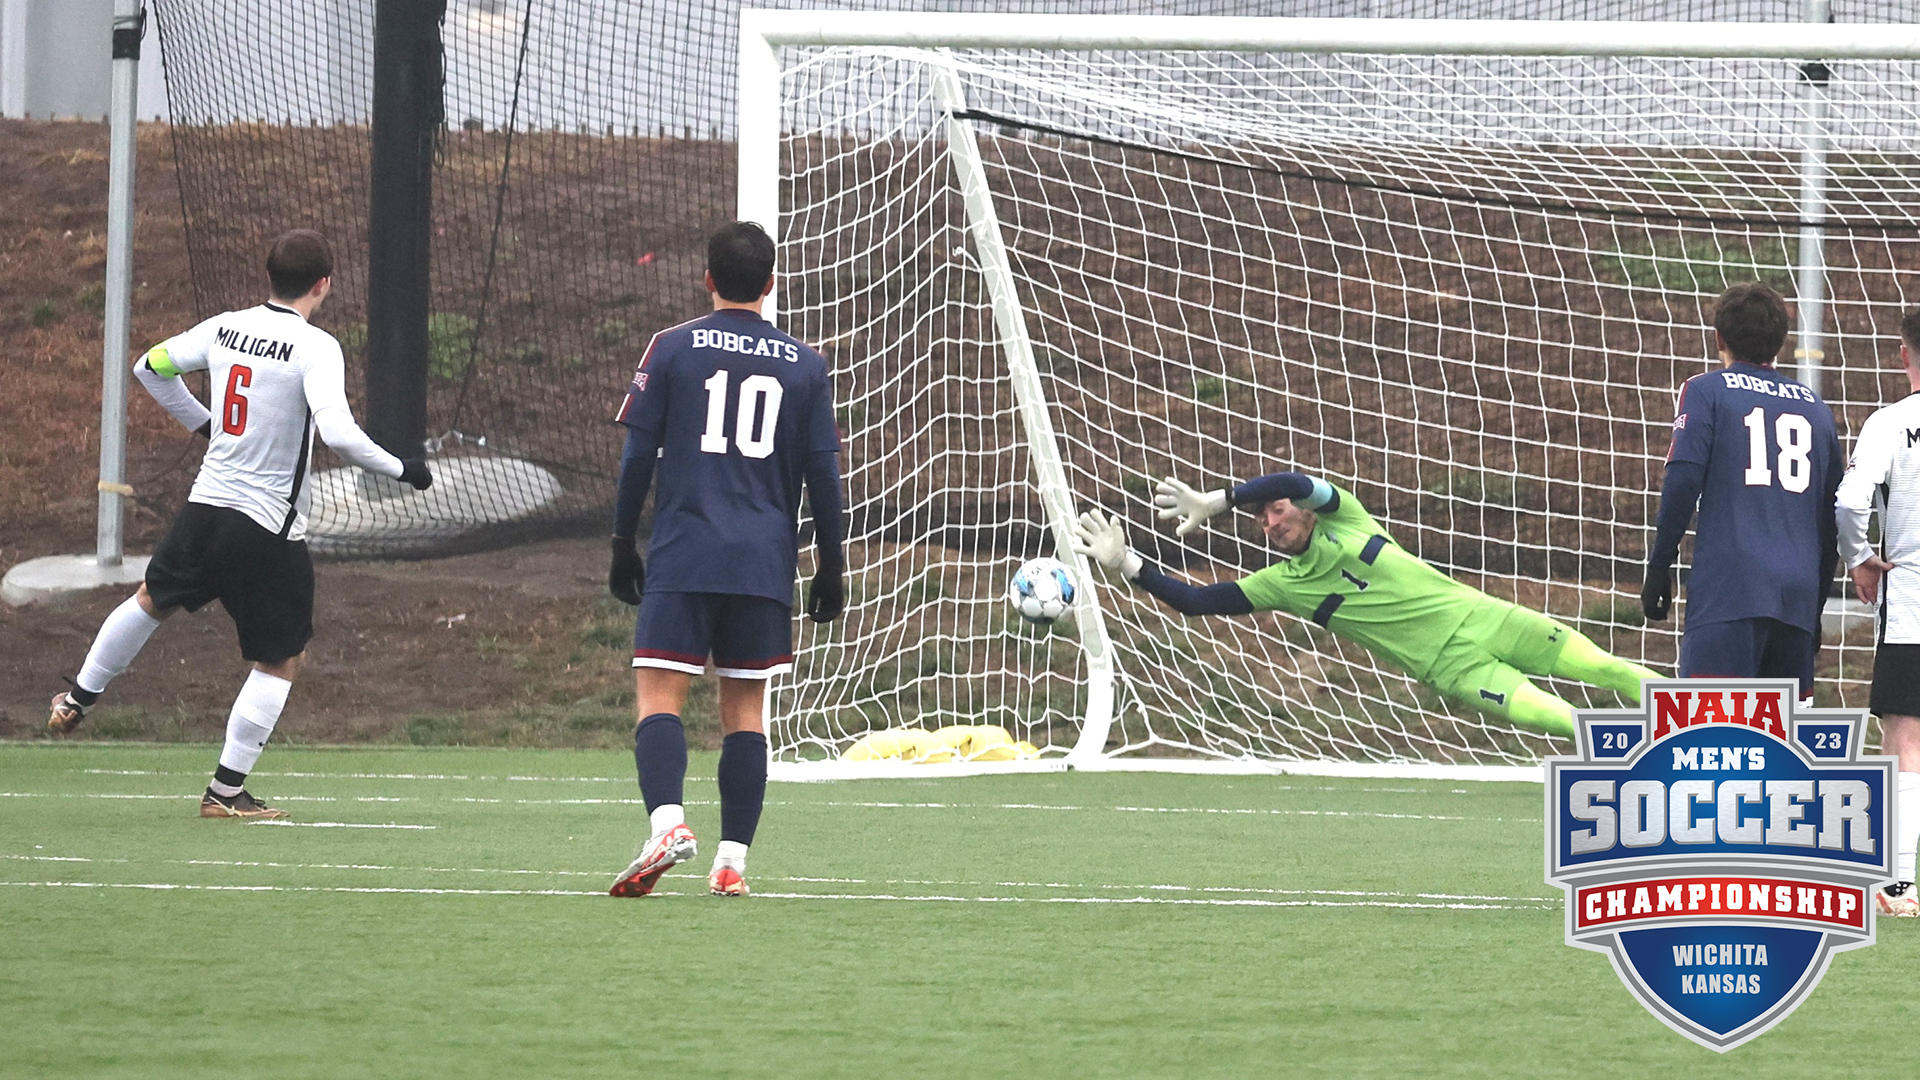 Haraldstad's PK Sends Milligan to NAIA Title Game